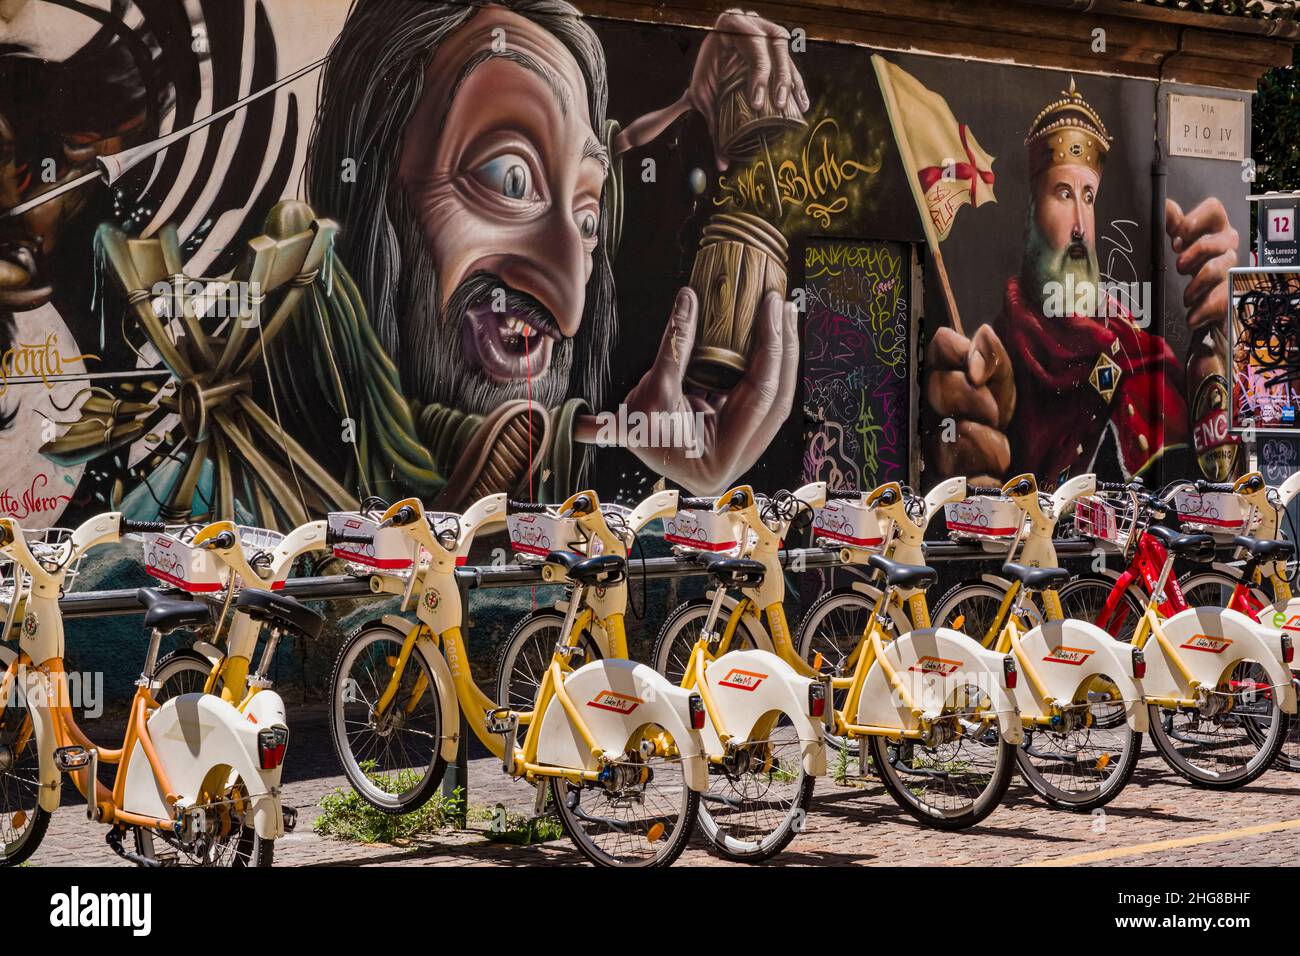 Rental bikes lined up in front of a wall of colorful imaginative graffiti with historical themes. Stock Photo